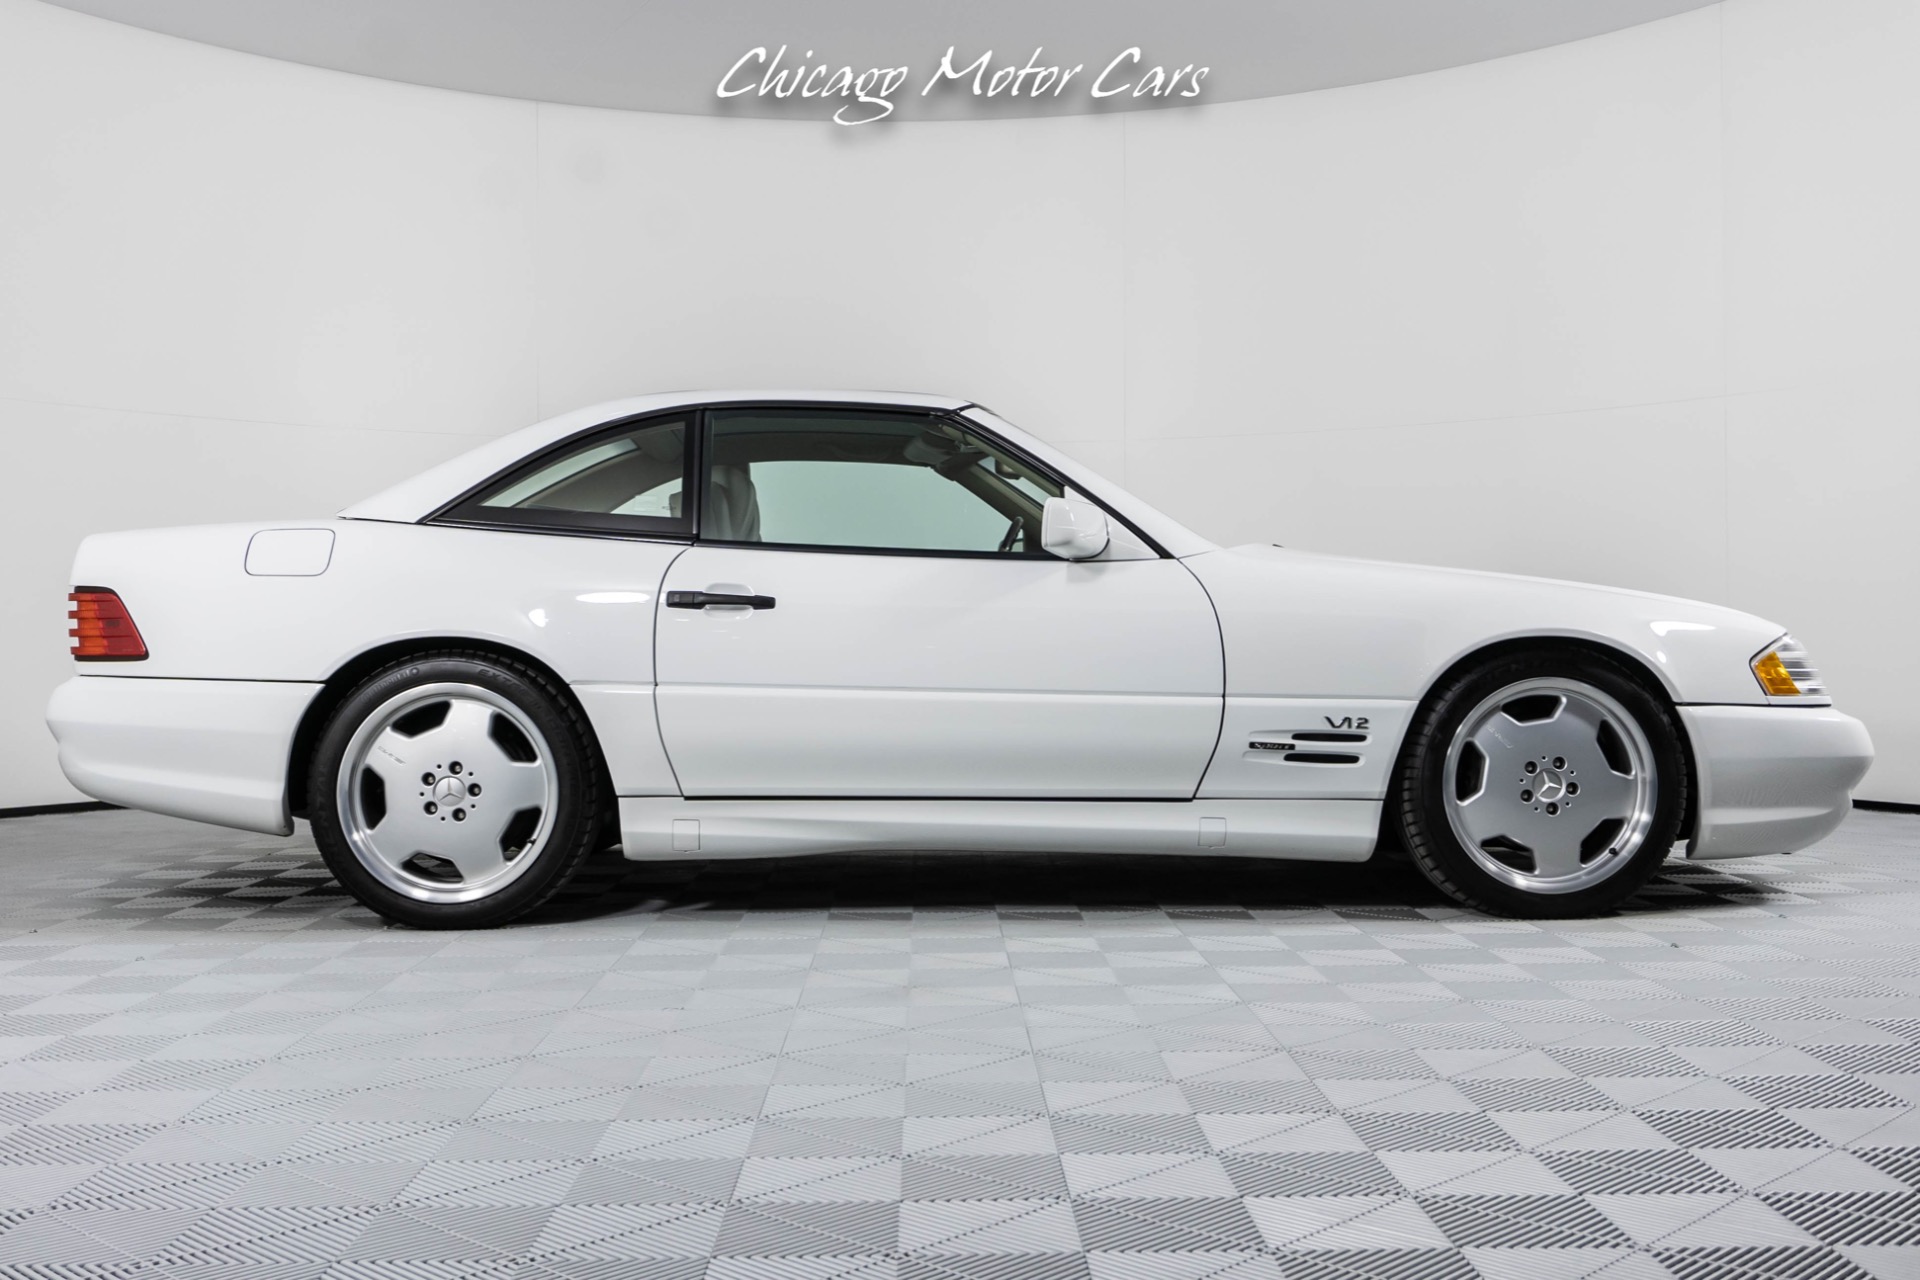 Used-1998-Mercedes-Benz-SL600-Roadster-Mint-Condition-Removable-Hardtop-w-Panoramic-Glass-Roof